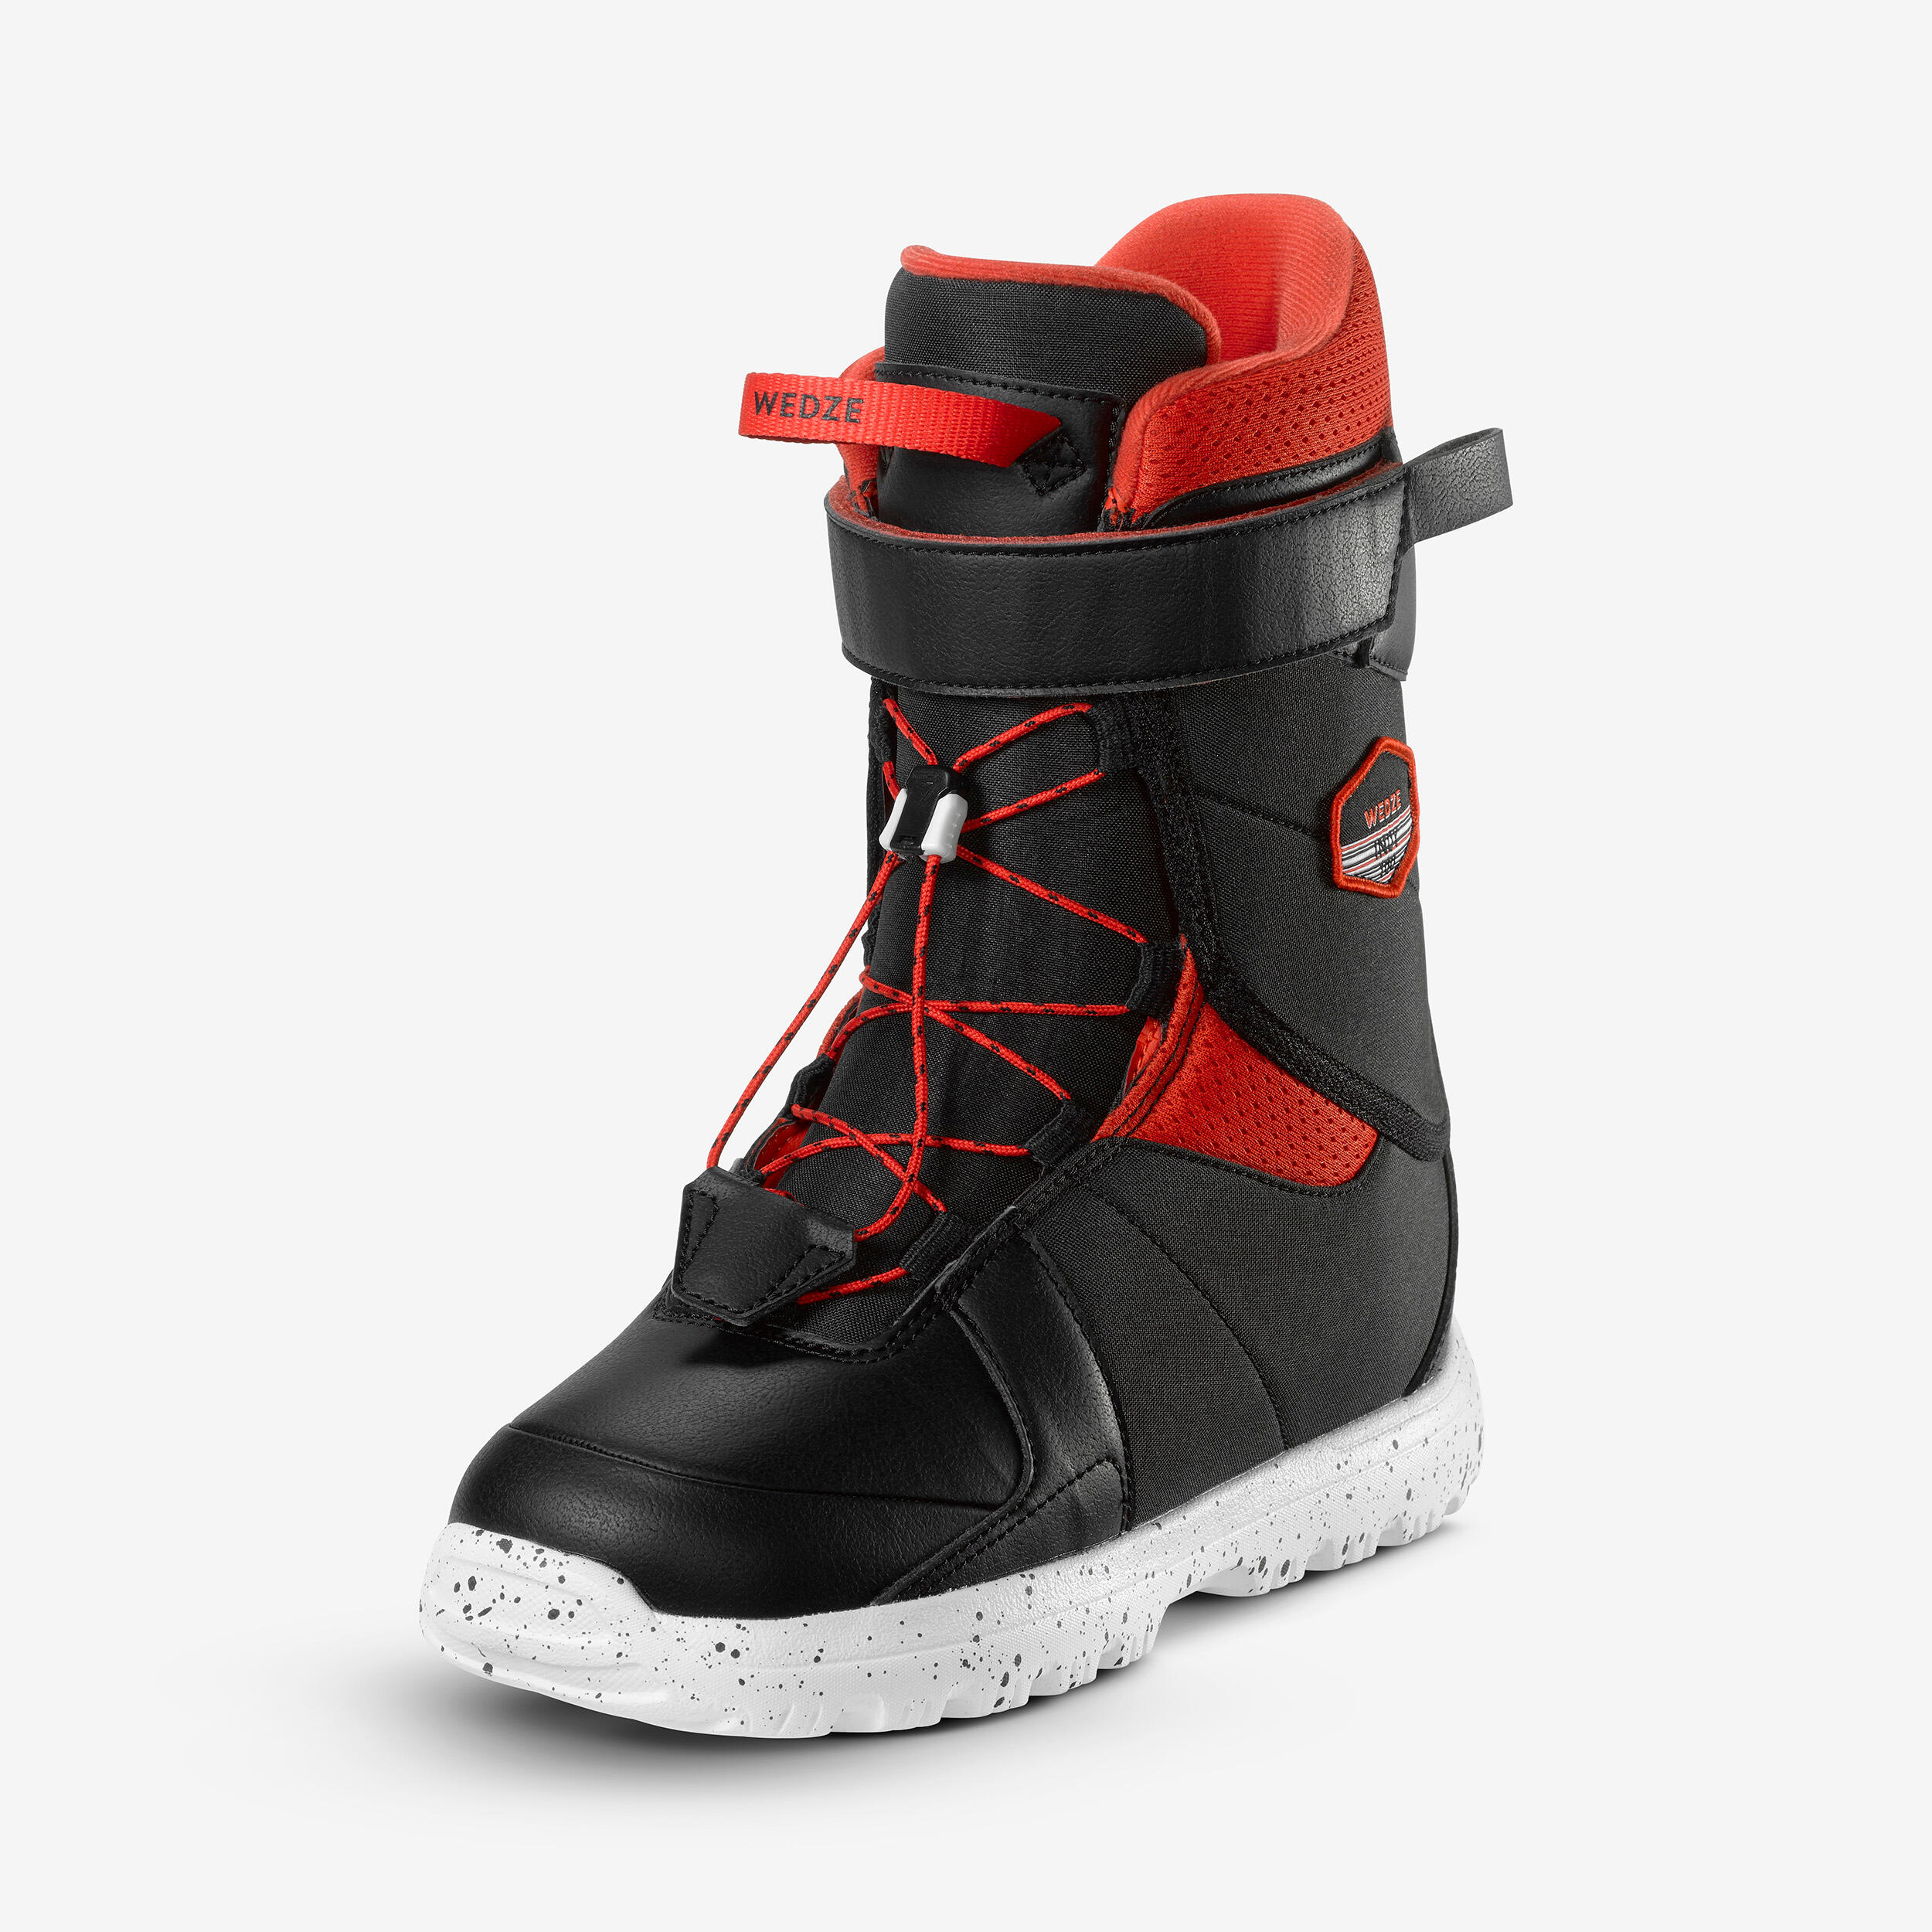 Kids’ Snowboarding Boots – Indy 100